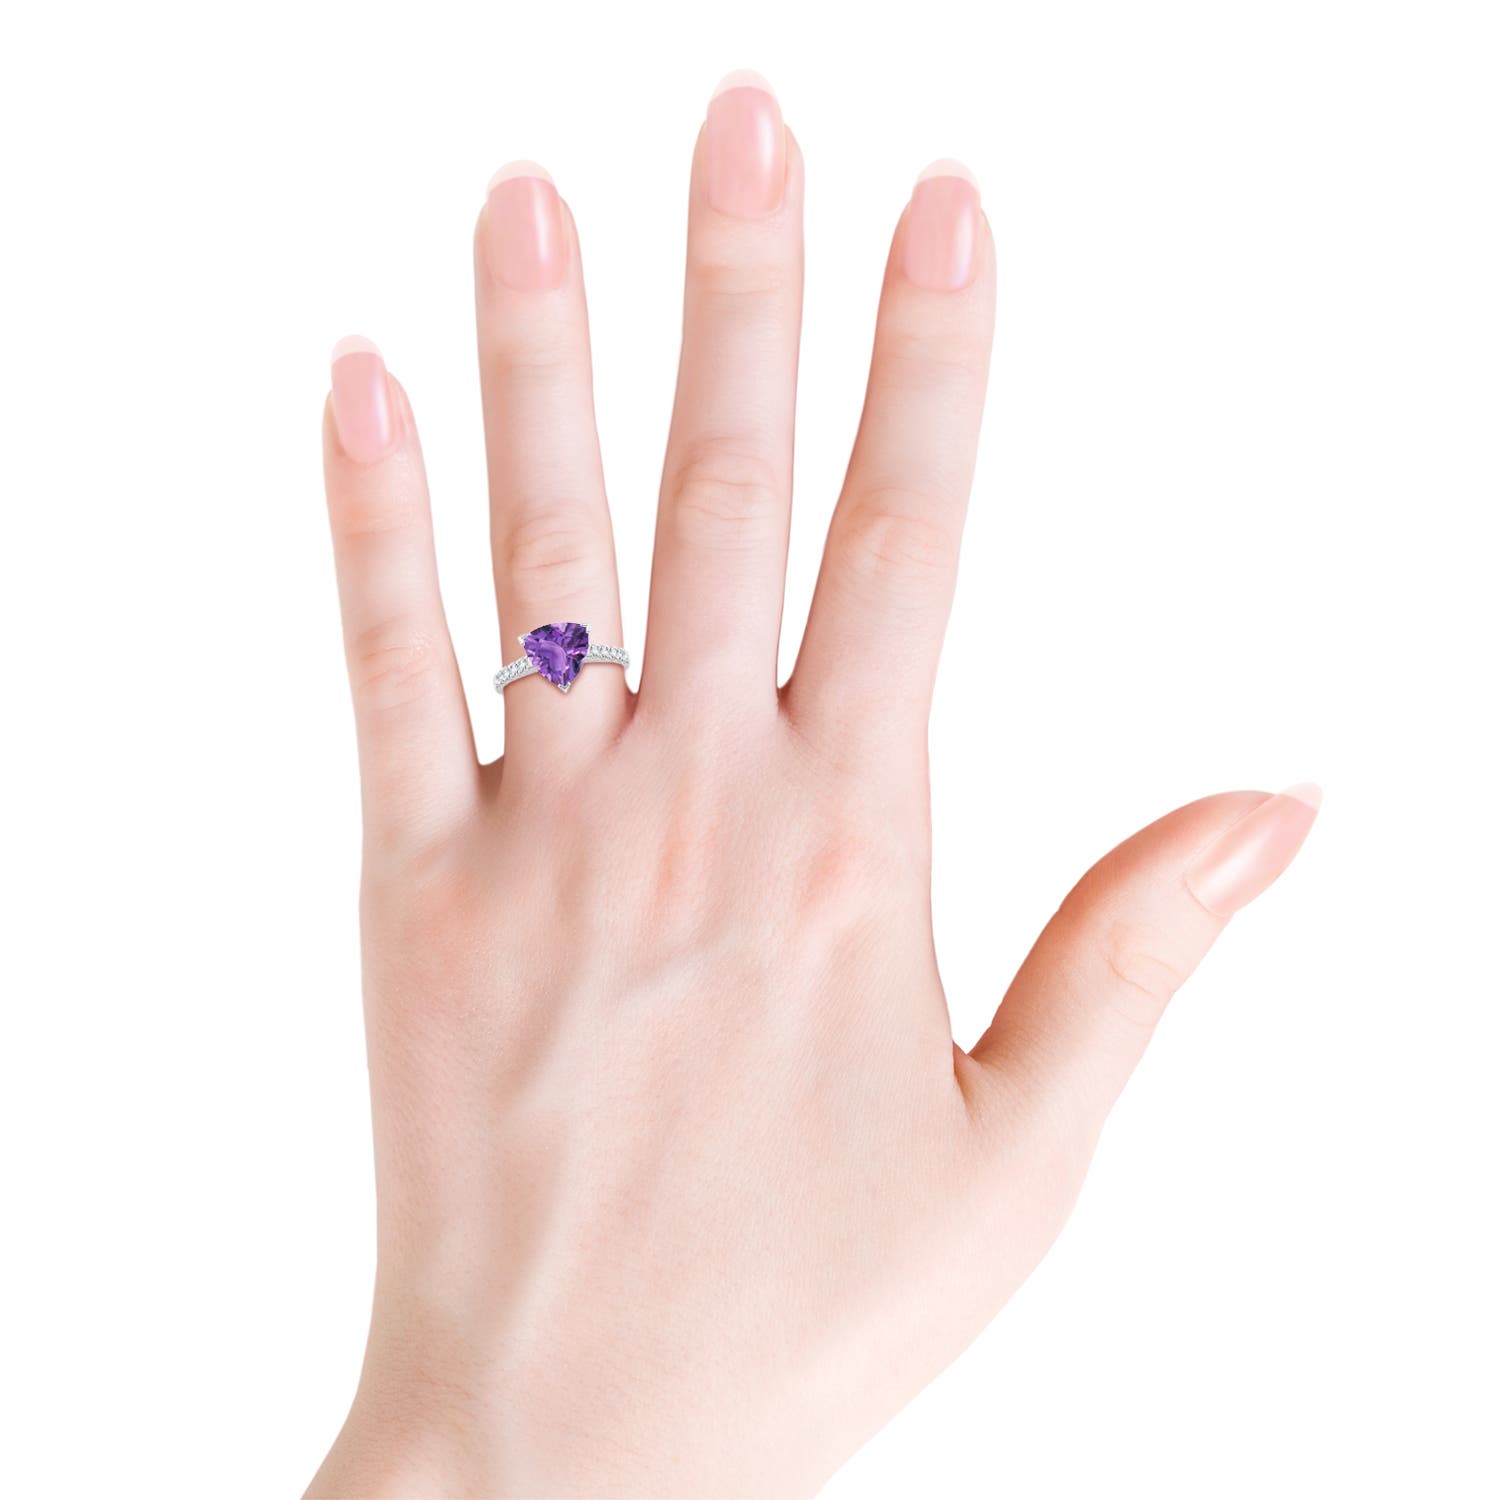 AA - Amethyst / 2.53 CT / 14 KT White Gold